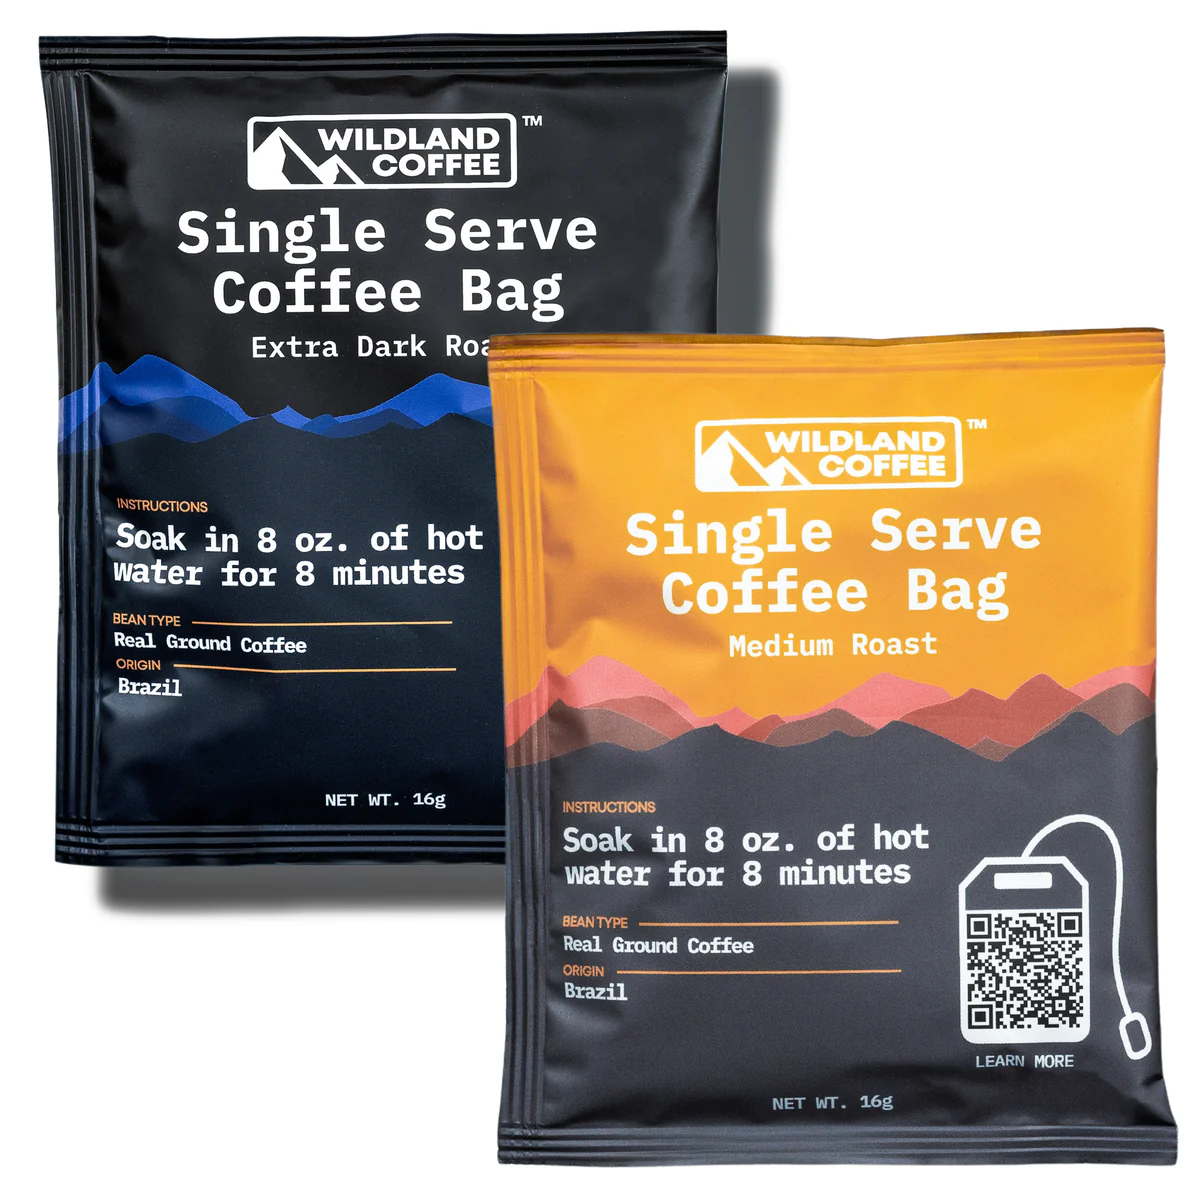 Two varieties of Wildland Coffee bags, both of which make excellent gifts for outdoorsy women